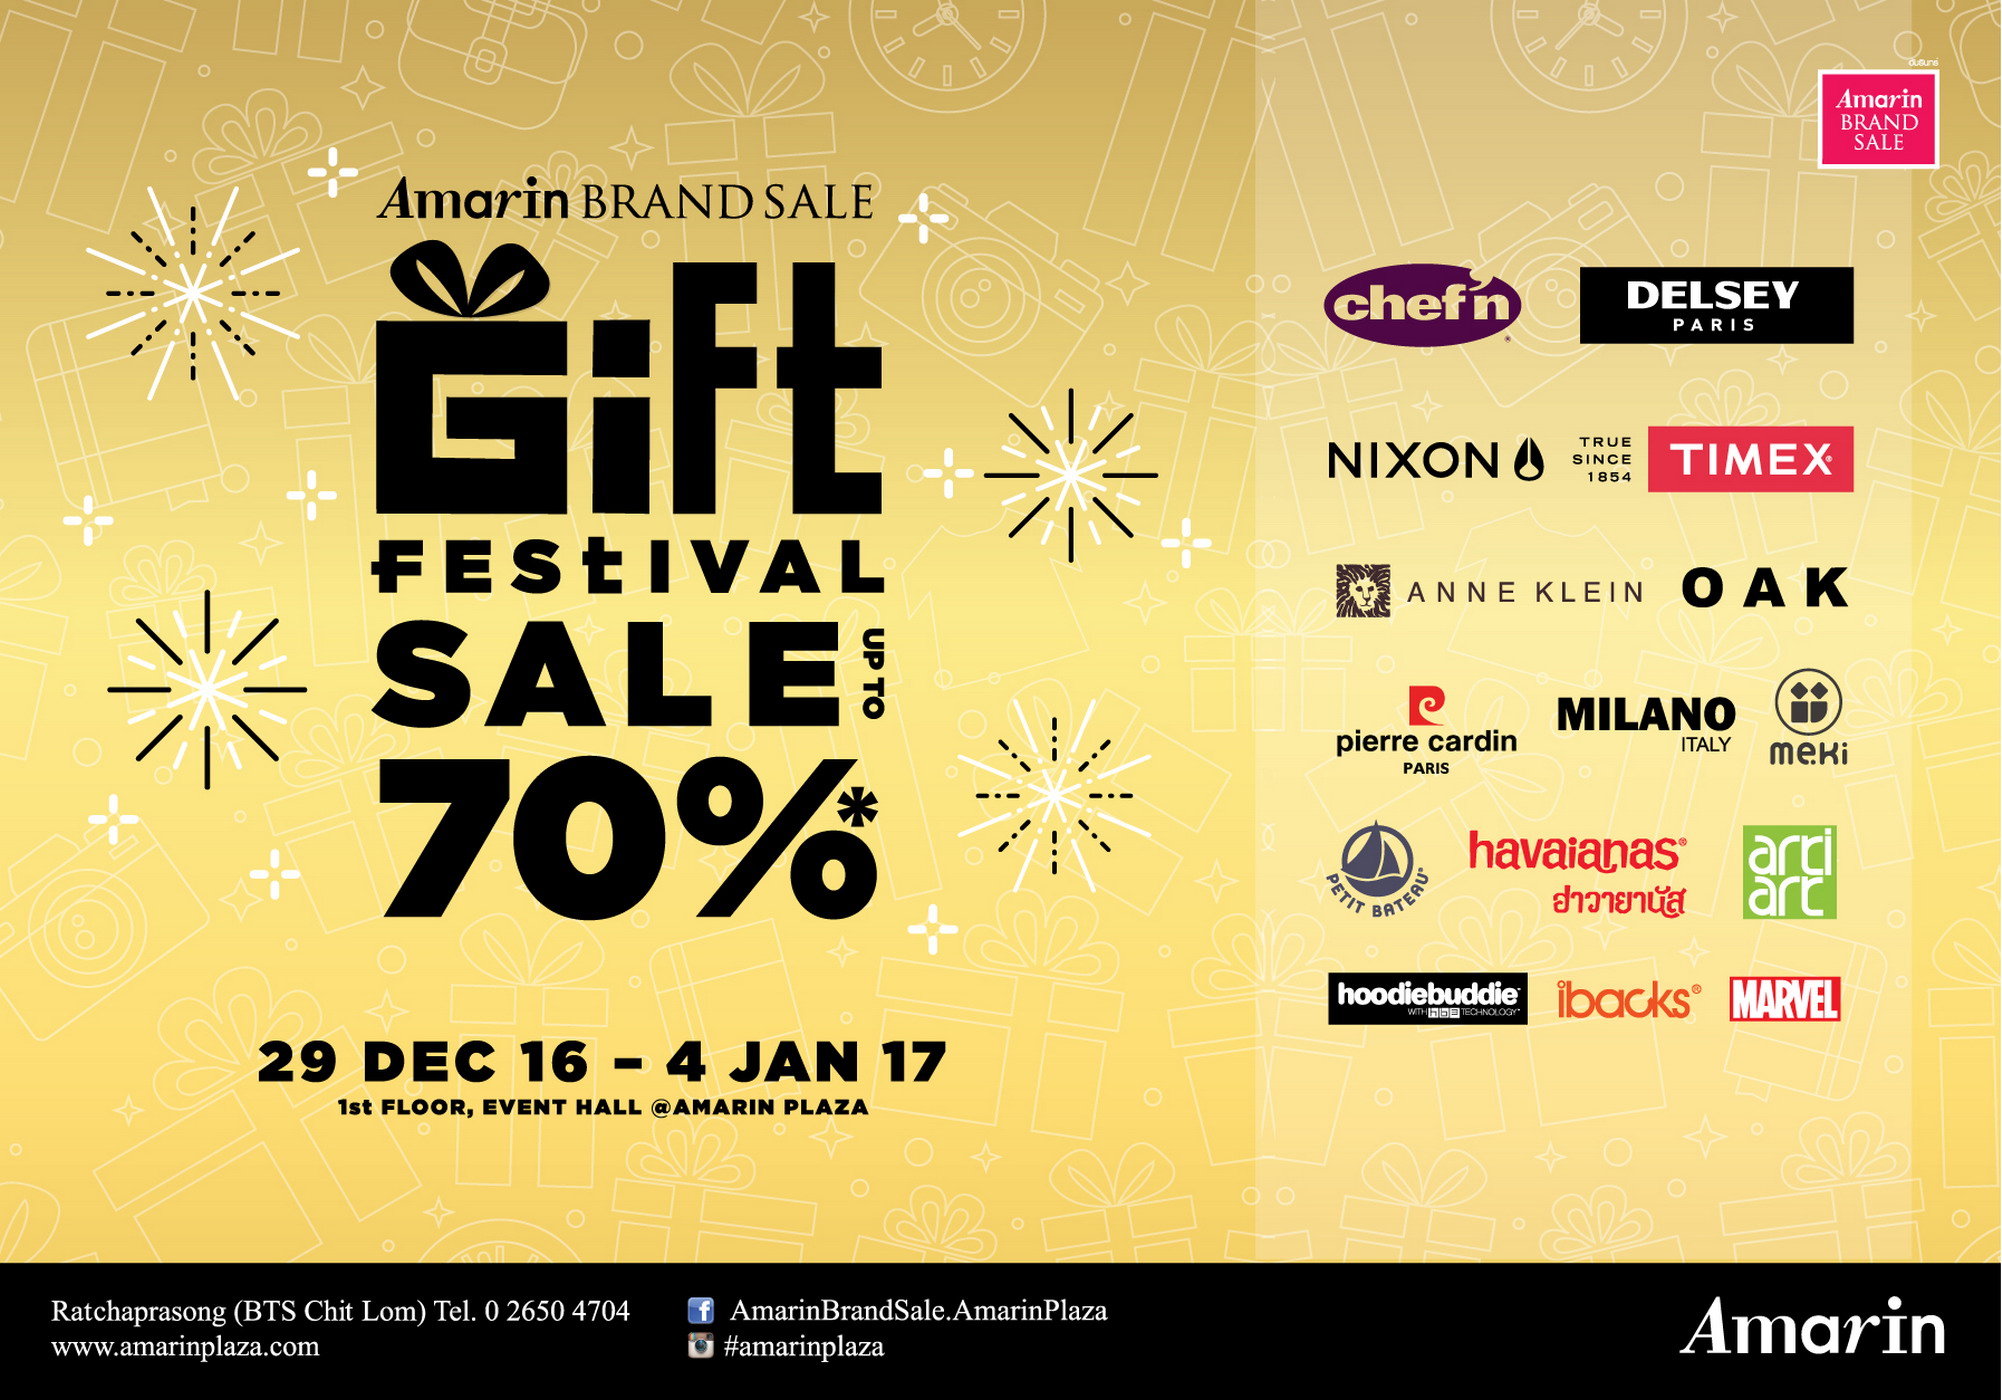 Amarin Brand Sale: Gift Festival Sale Up To 70%